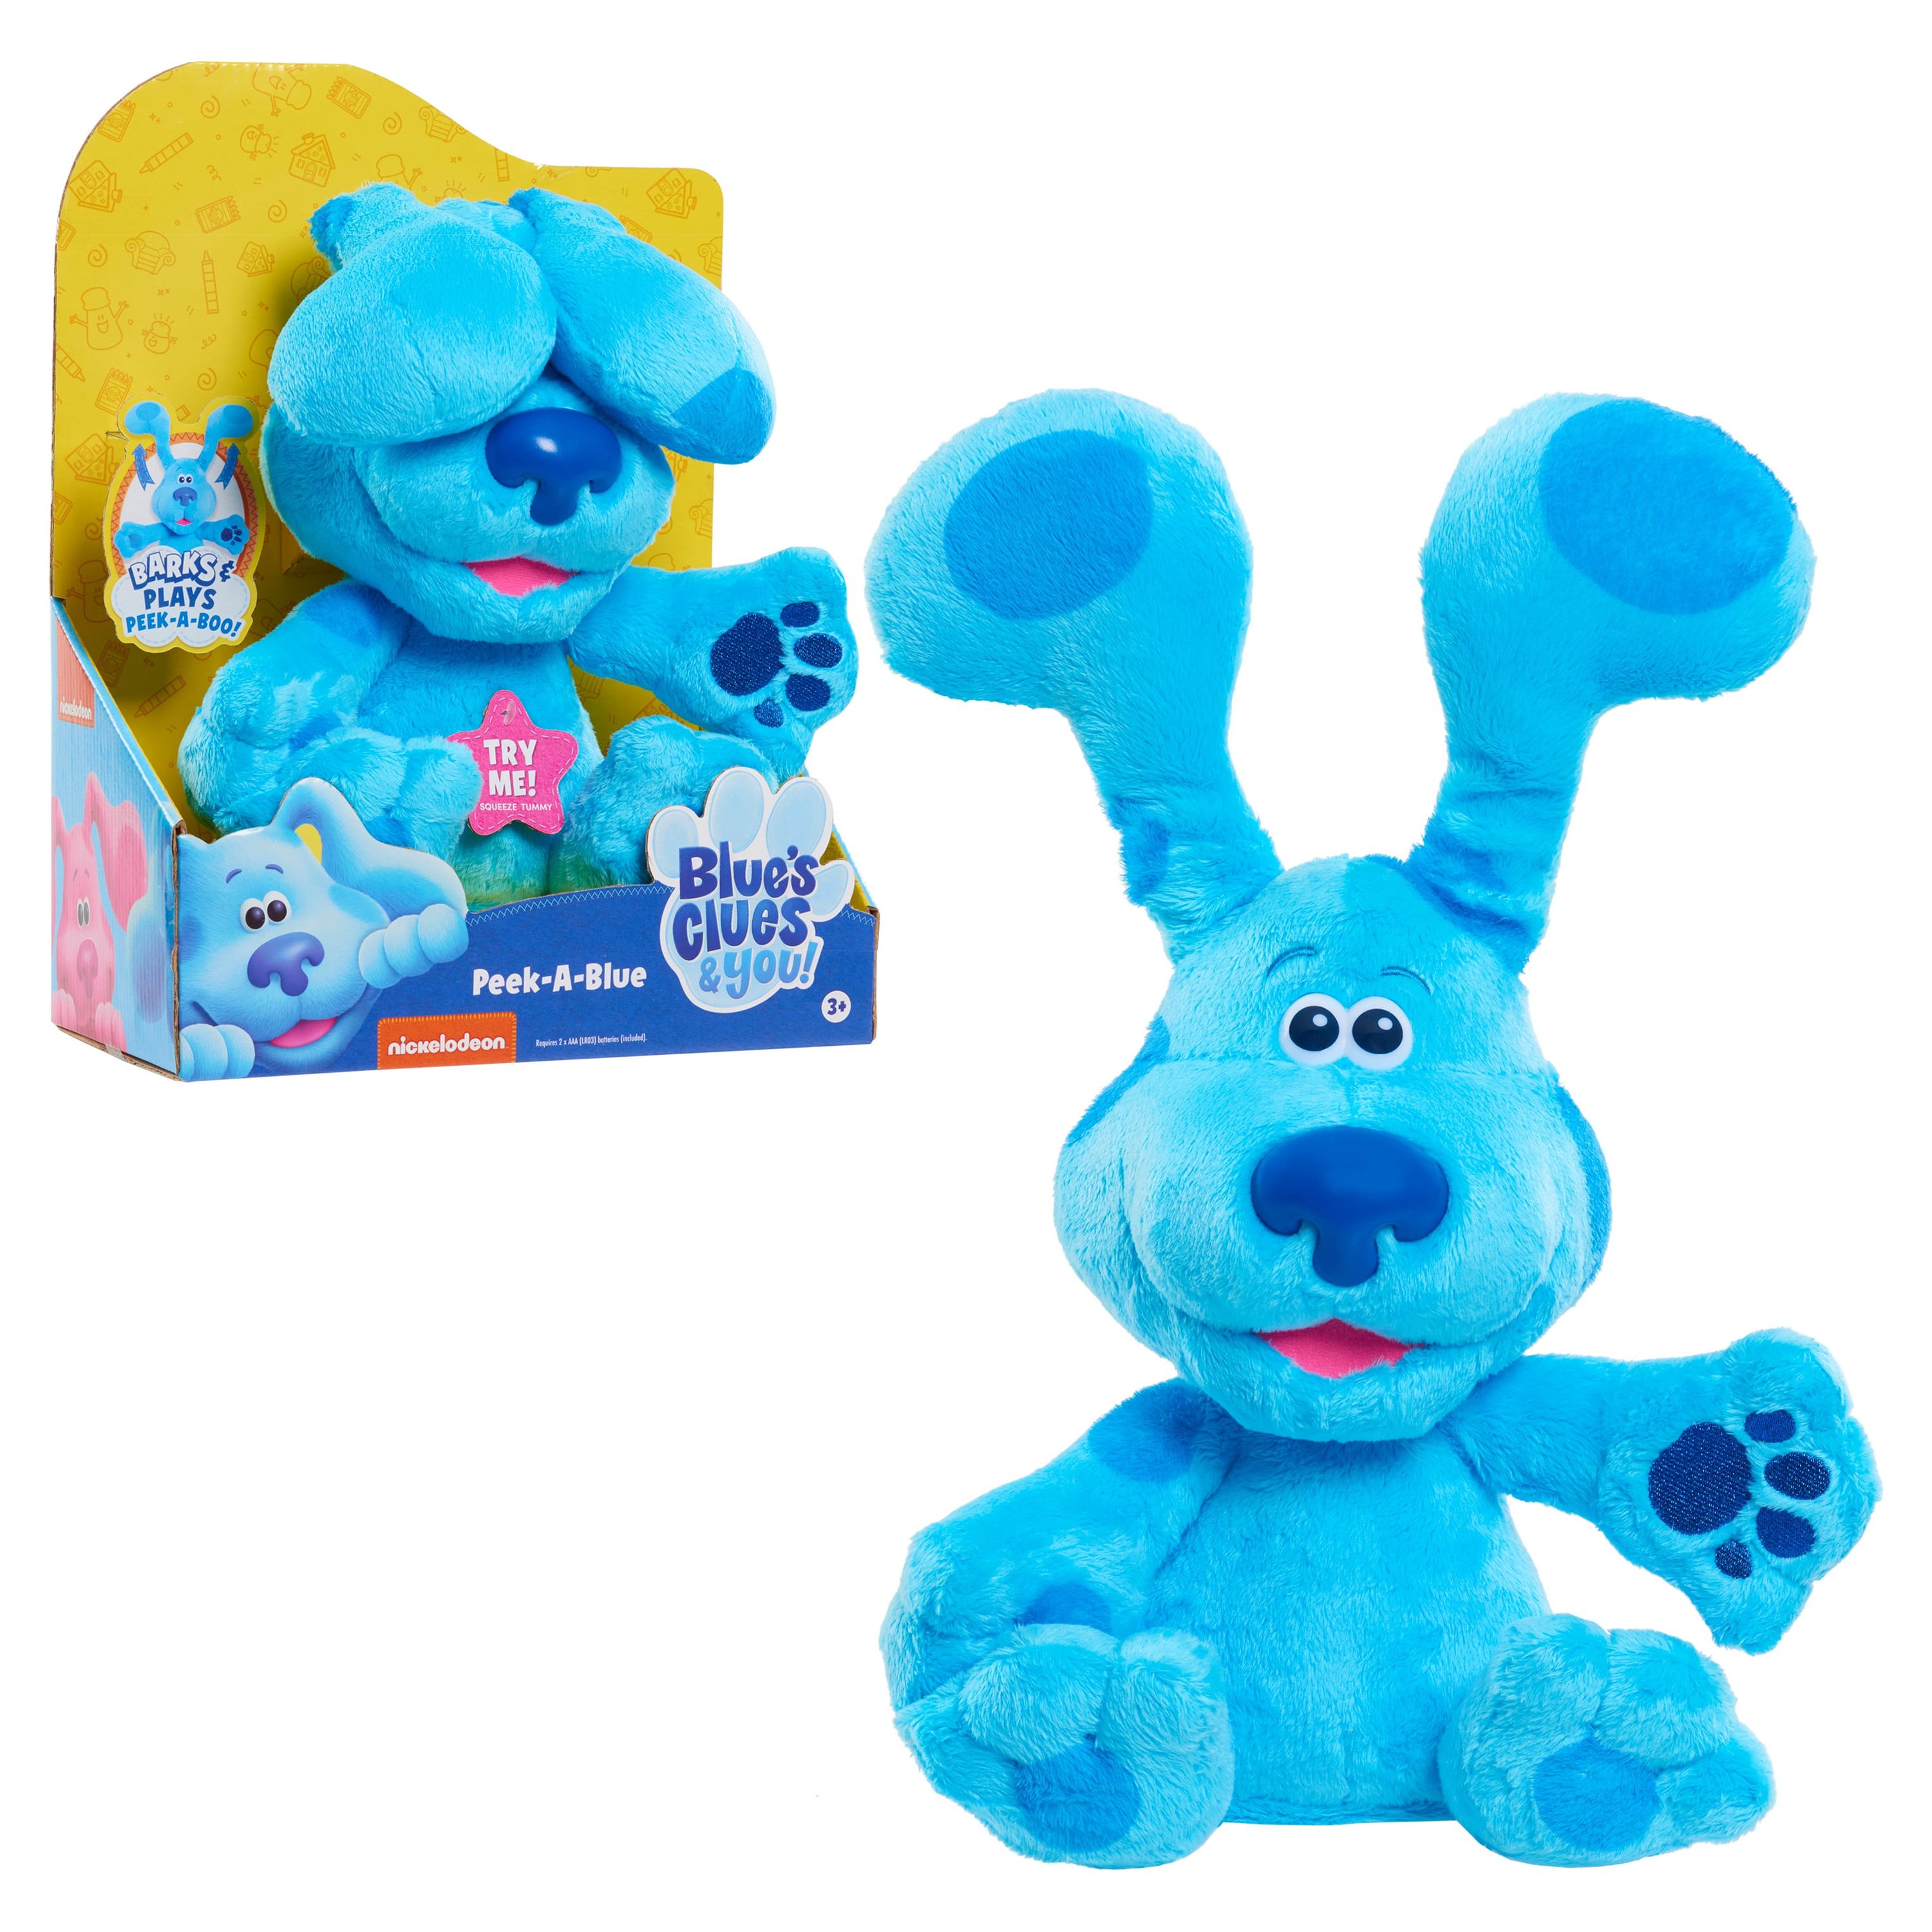 Blue’s Clues & You! Peek-A-Blue, Interactive Barking Peek-A-Boo Stuffed Animal, Dog,  Kids Toys for Ages 3 Up, Gifts and Presents - image 1 of 5